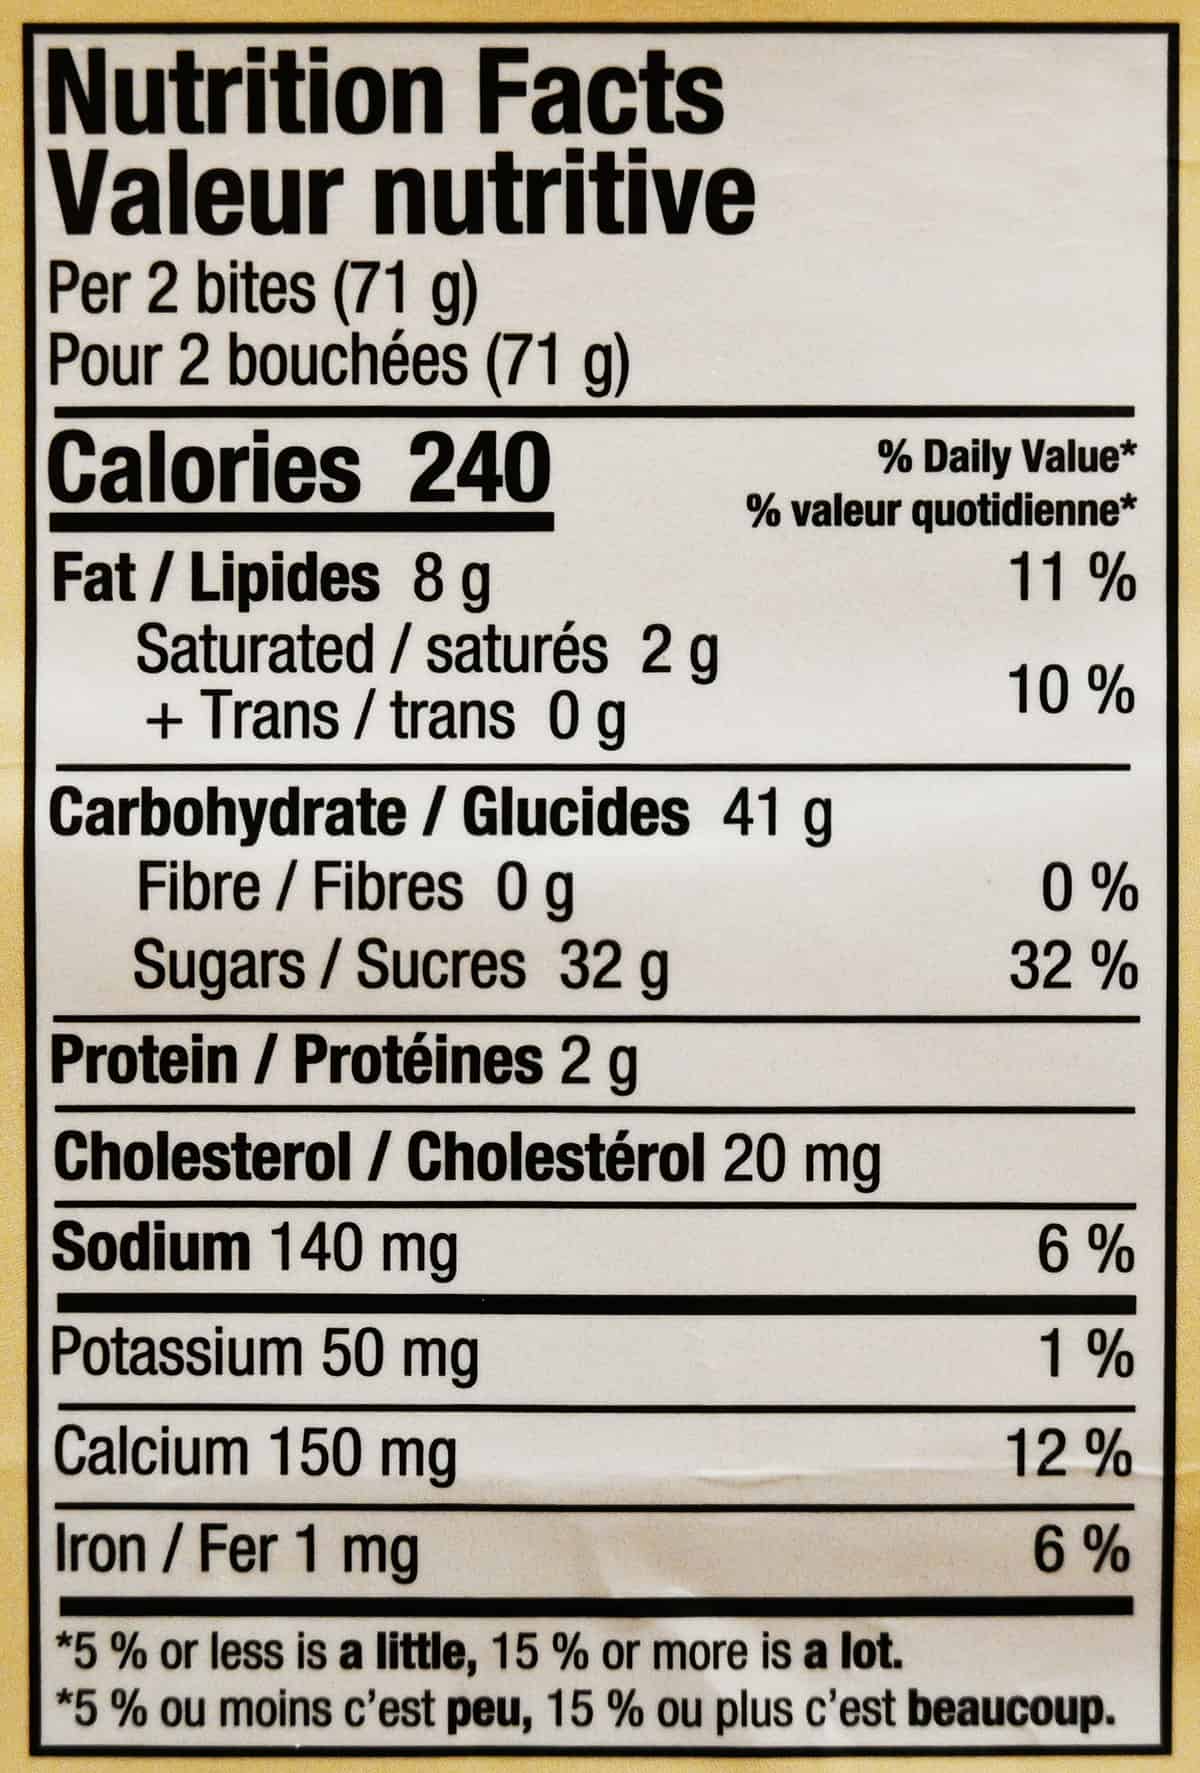 Image of the nutrition facts label for the bites from the package.